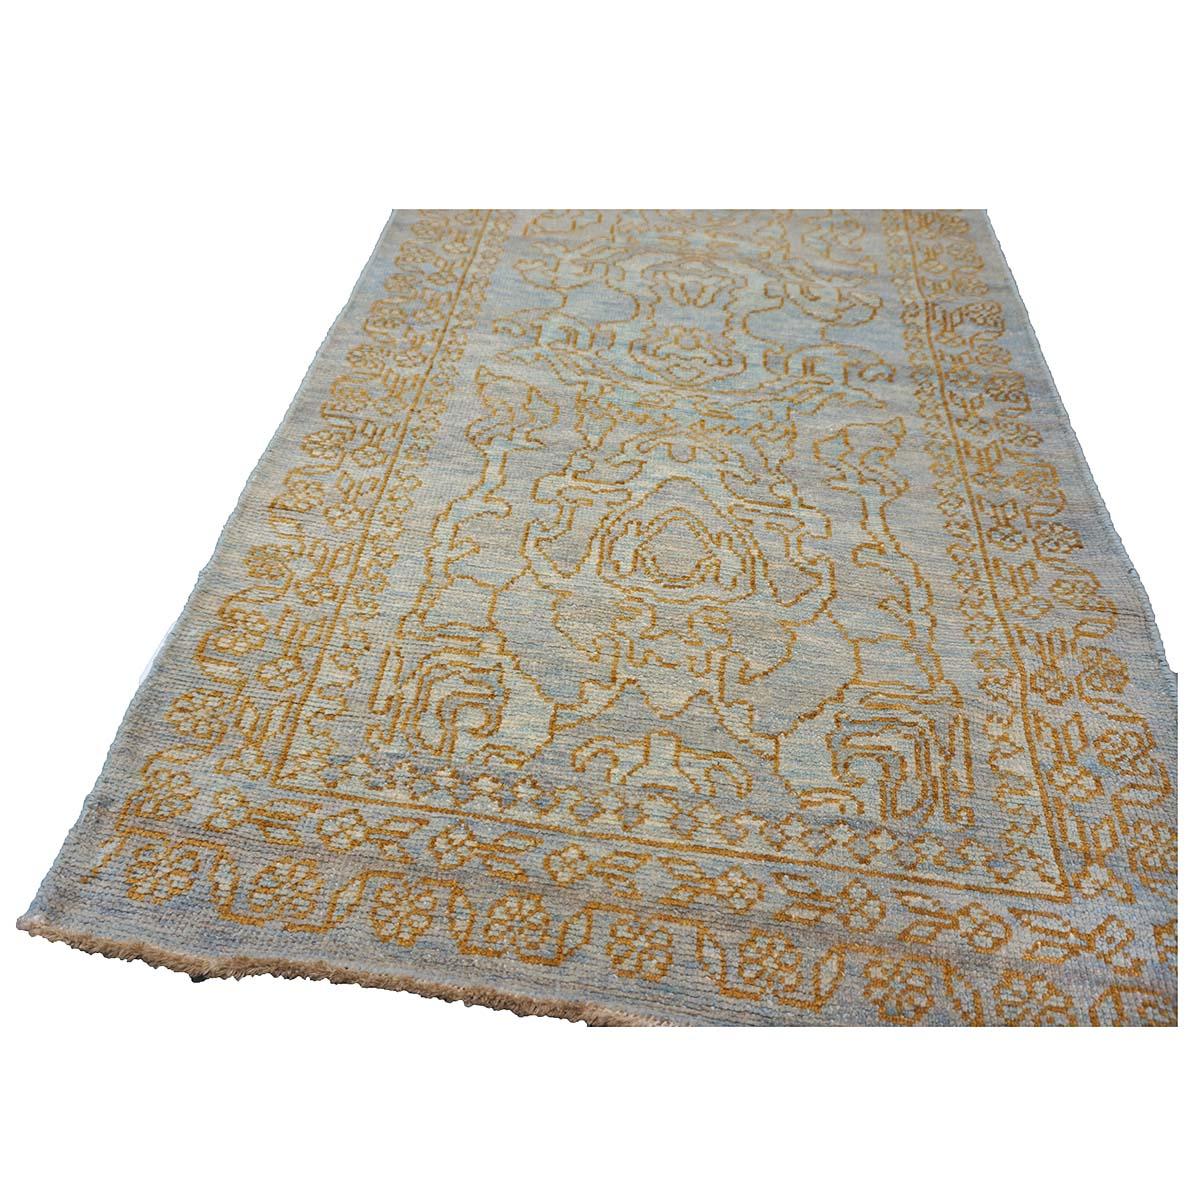 21st Century Sultanabad Master 3x12 Light Slate & Gold Hallway Runner Rug In Excellent Condition For Sale In Houston, TX